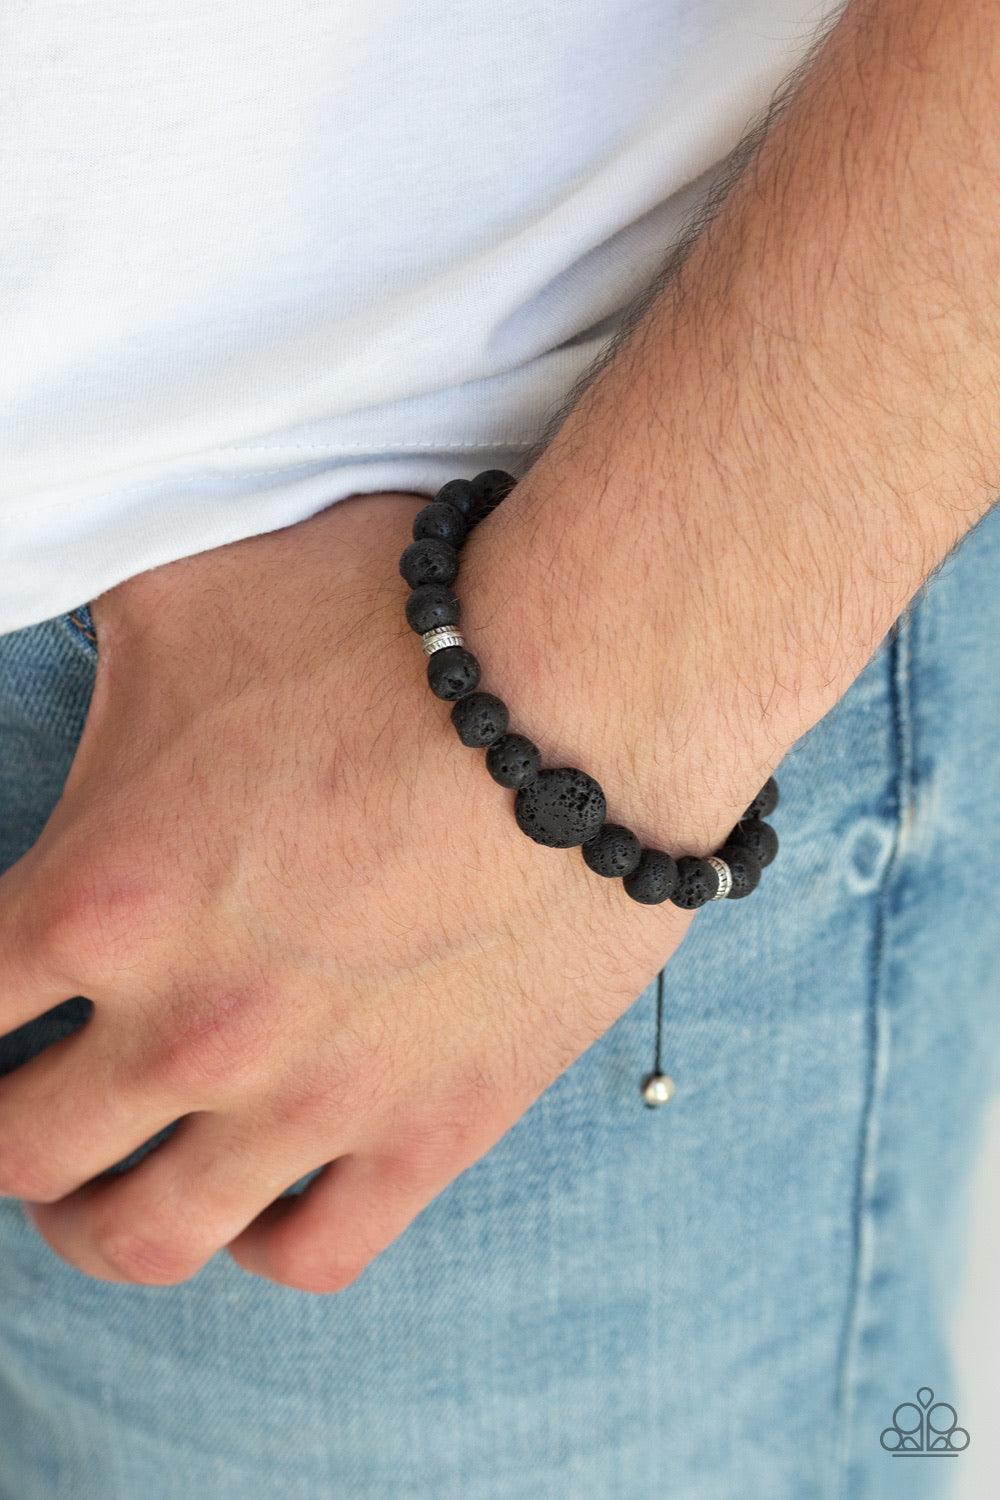 Paparazzi Accessories Intention - Black Infused with dainty silver beads, a collection of earthy black lava rock beads are threaded along a shiny cord around the wrist for a seasonal look. Features an adjustable sliding knot closure. Sold as one individua